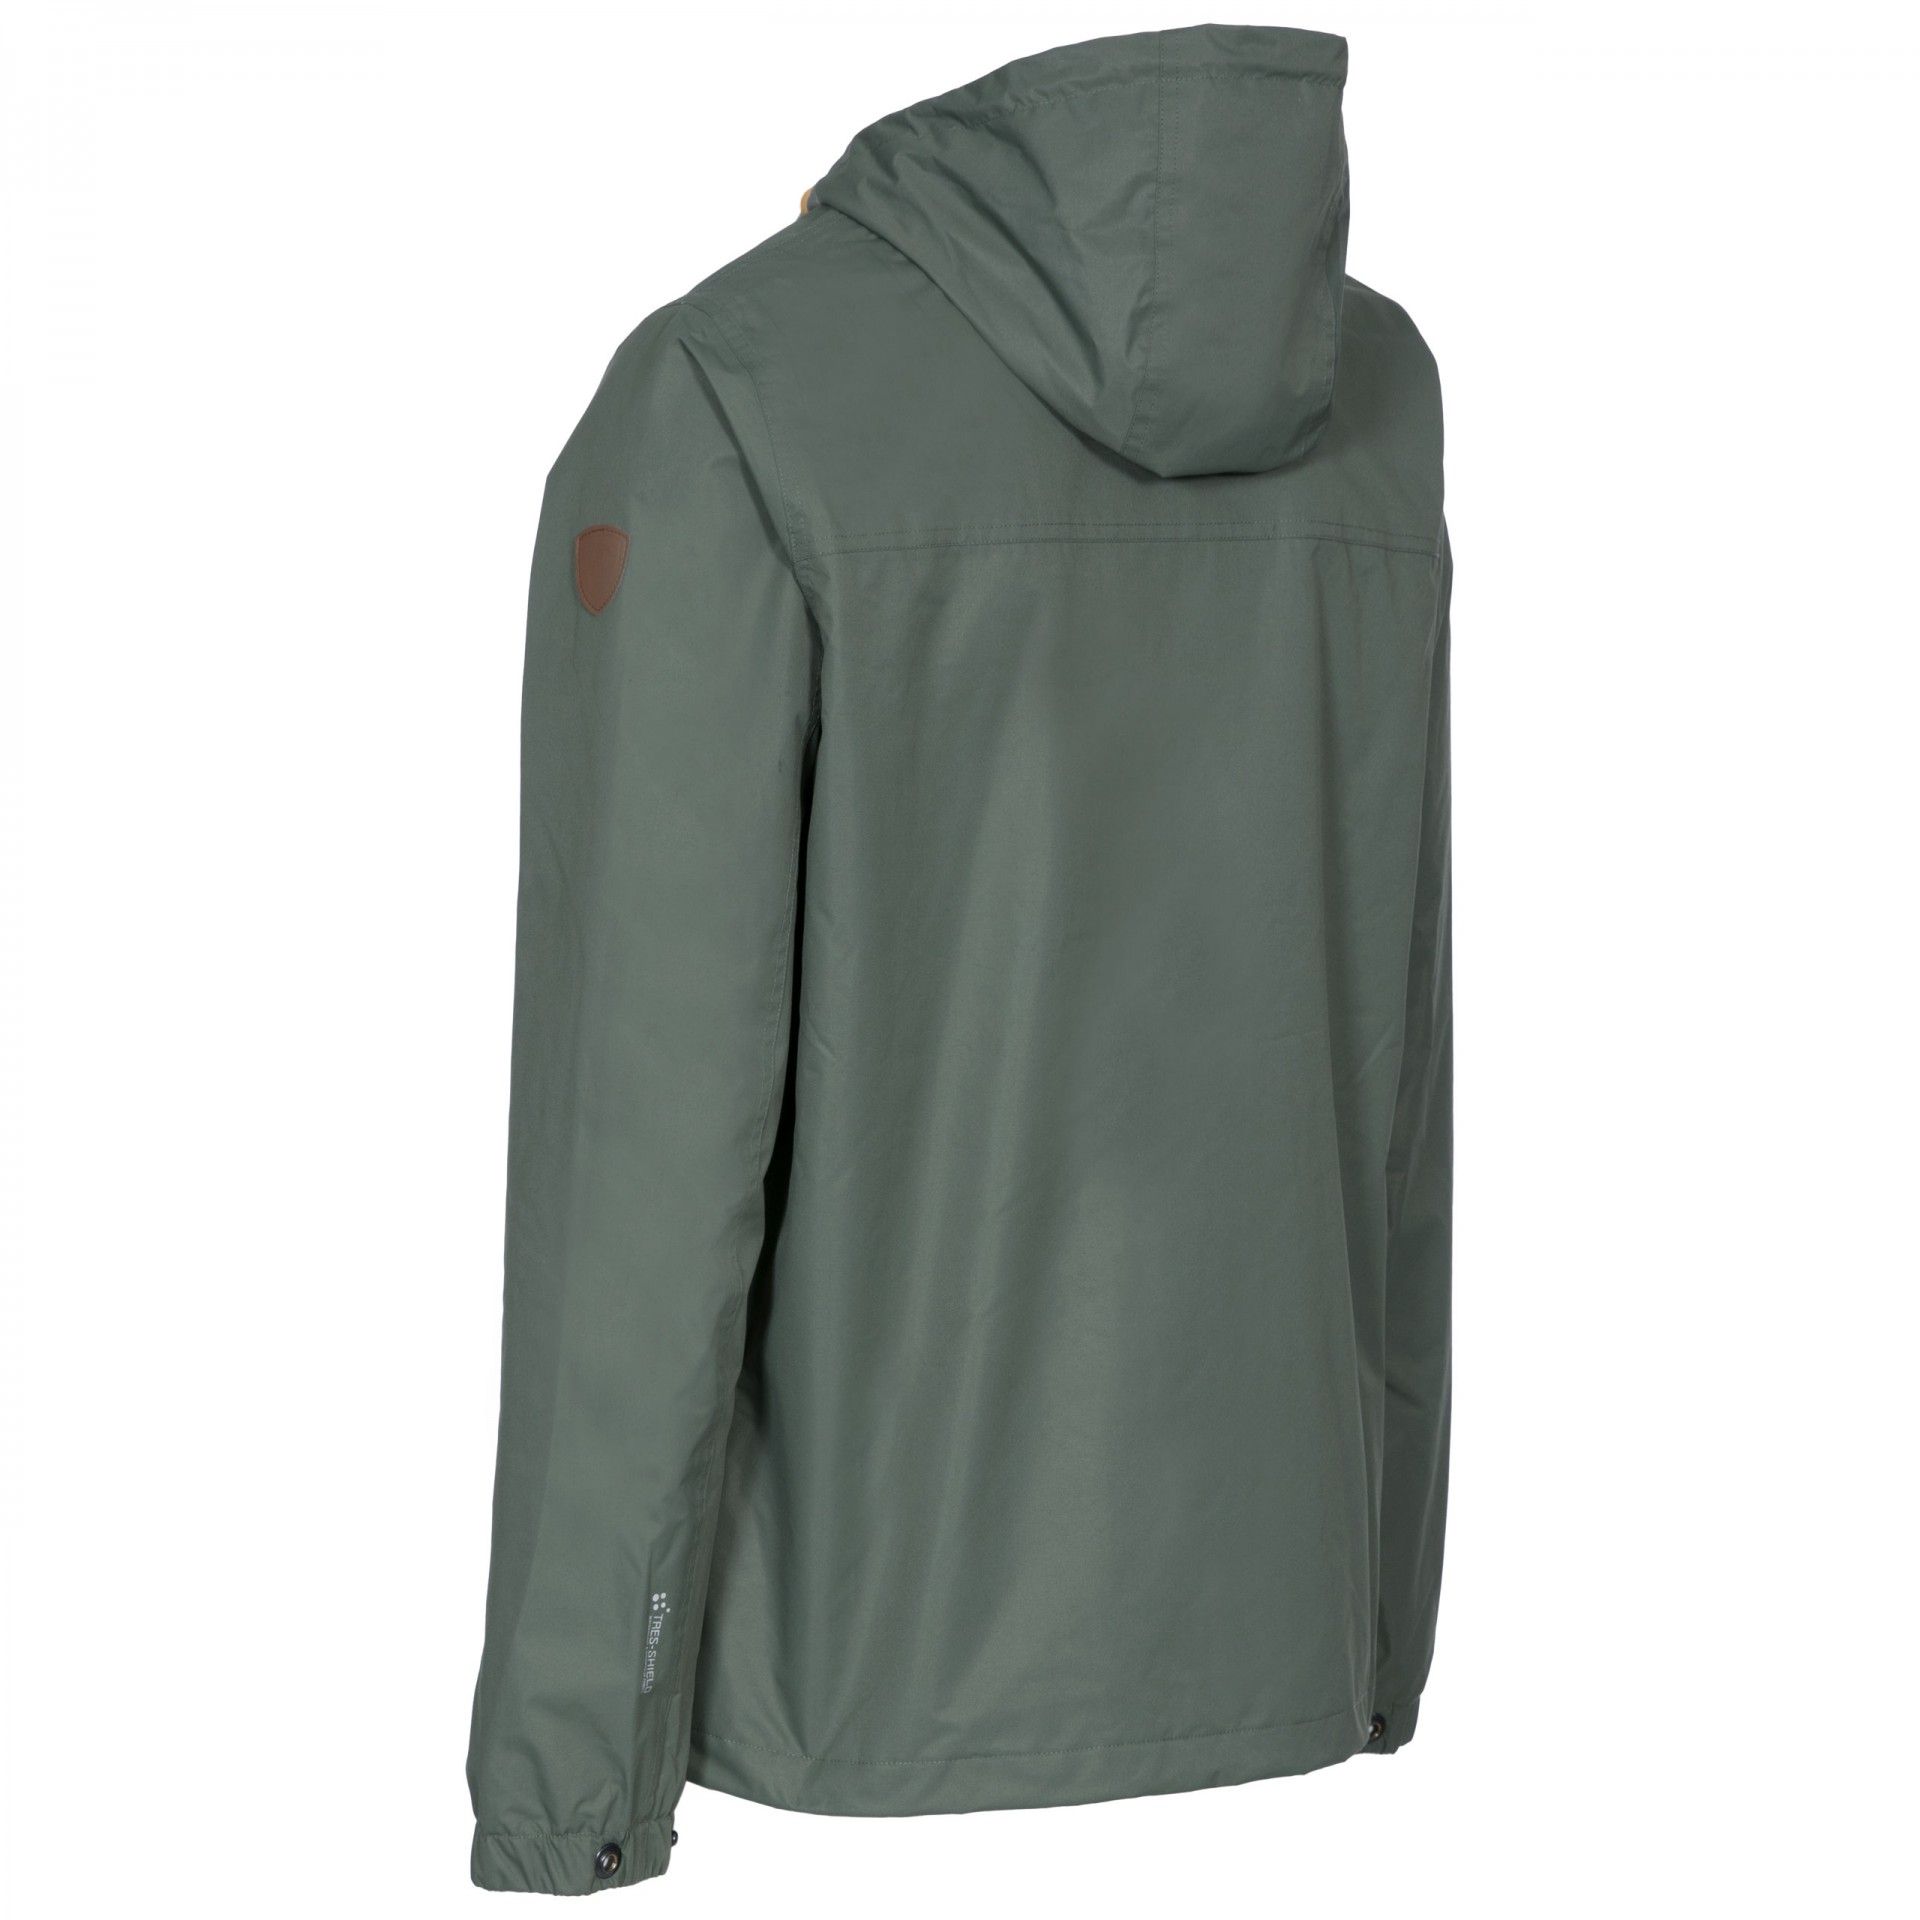 Mens jacket with grown on hood. Wind and waterproof, with jersey lining. Cord hood adjusters. 3 x zip pockets. Adjustable cuffs. Inner storm flap. Taped seams. Ideal for wearing outside on a cold day. 100% Polyester Taslan PU Coating. Lining: 100% Polyester.